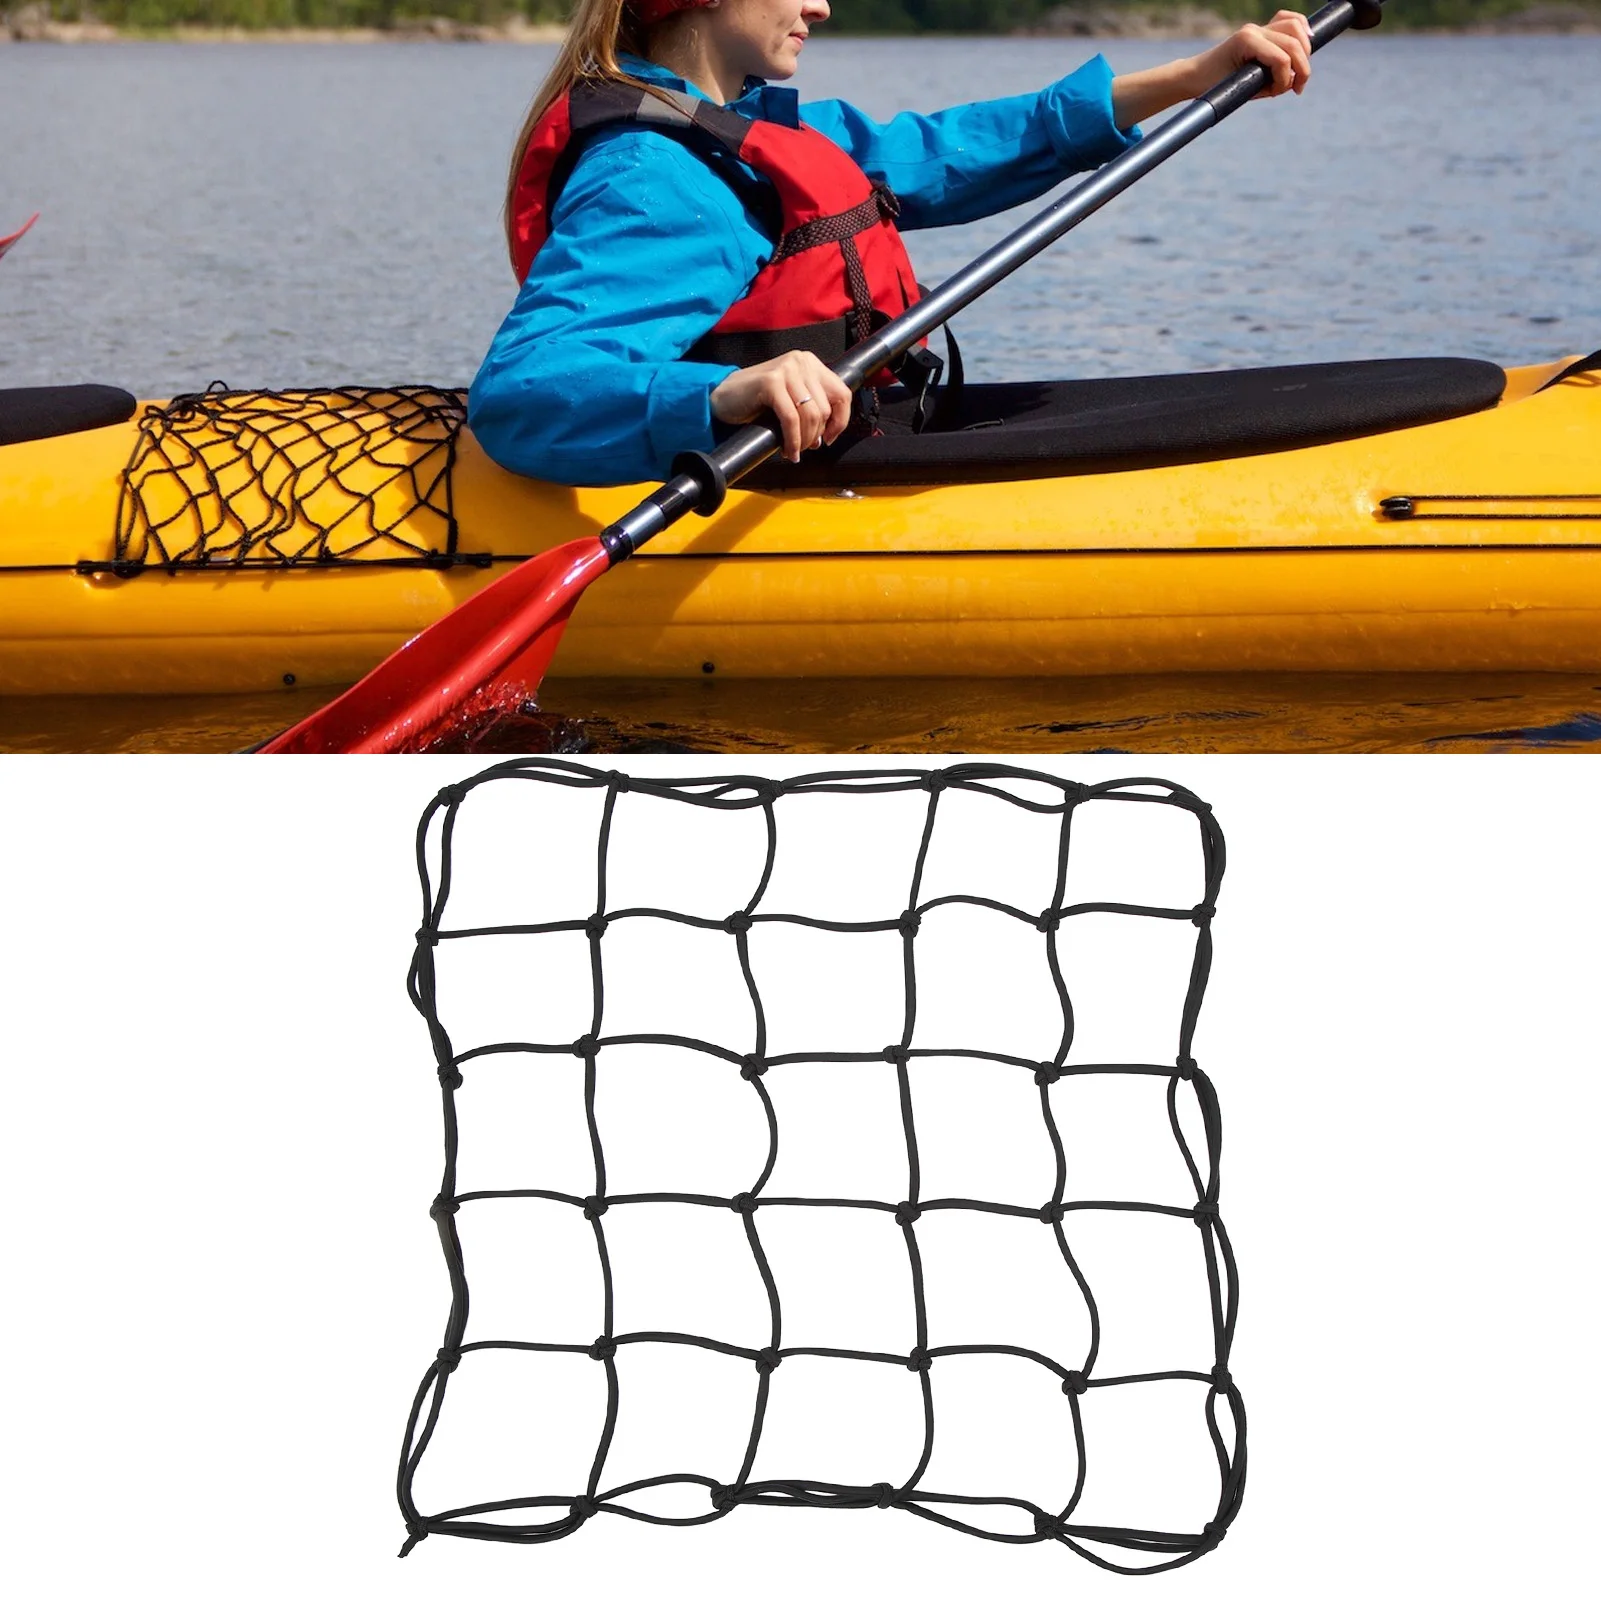 

15 Inch Cargo Net Elastic Powerful Protection Versatile High Strength Motorbike Storage Organizer Net For Motorcycle ATVs Boats